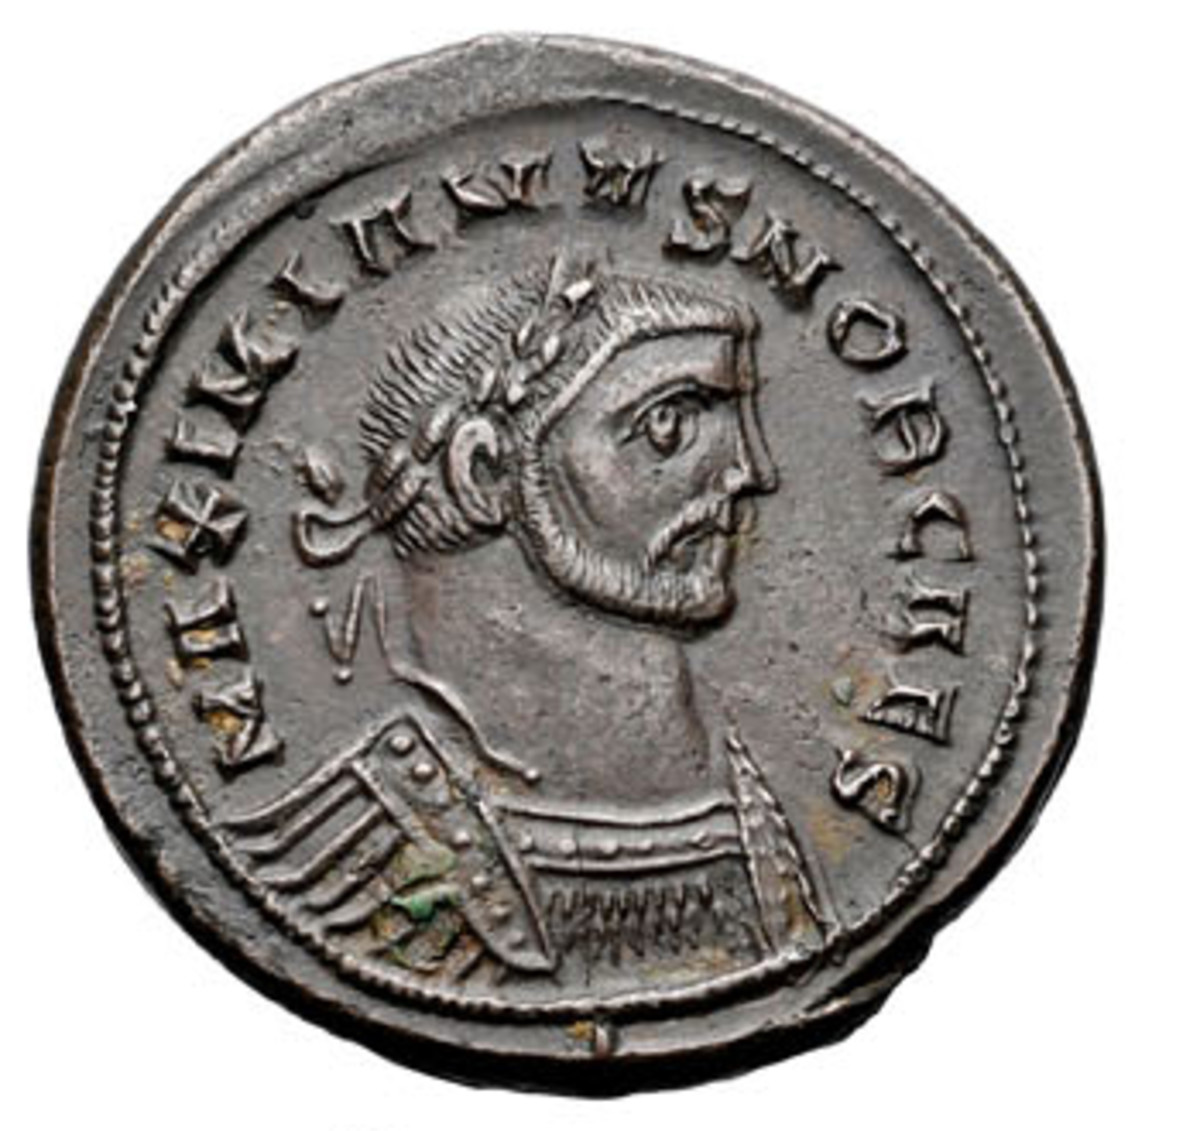 The U.S. State Department did not extend the memo of understanding to include coins like this Roman Imperial piece.